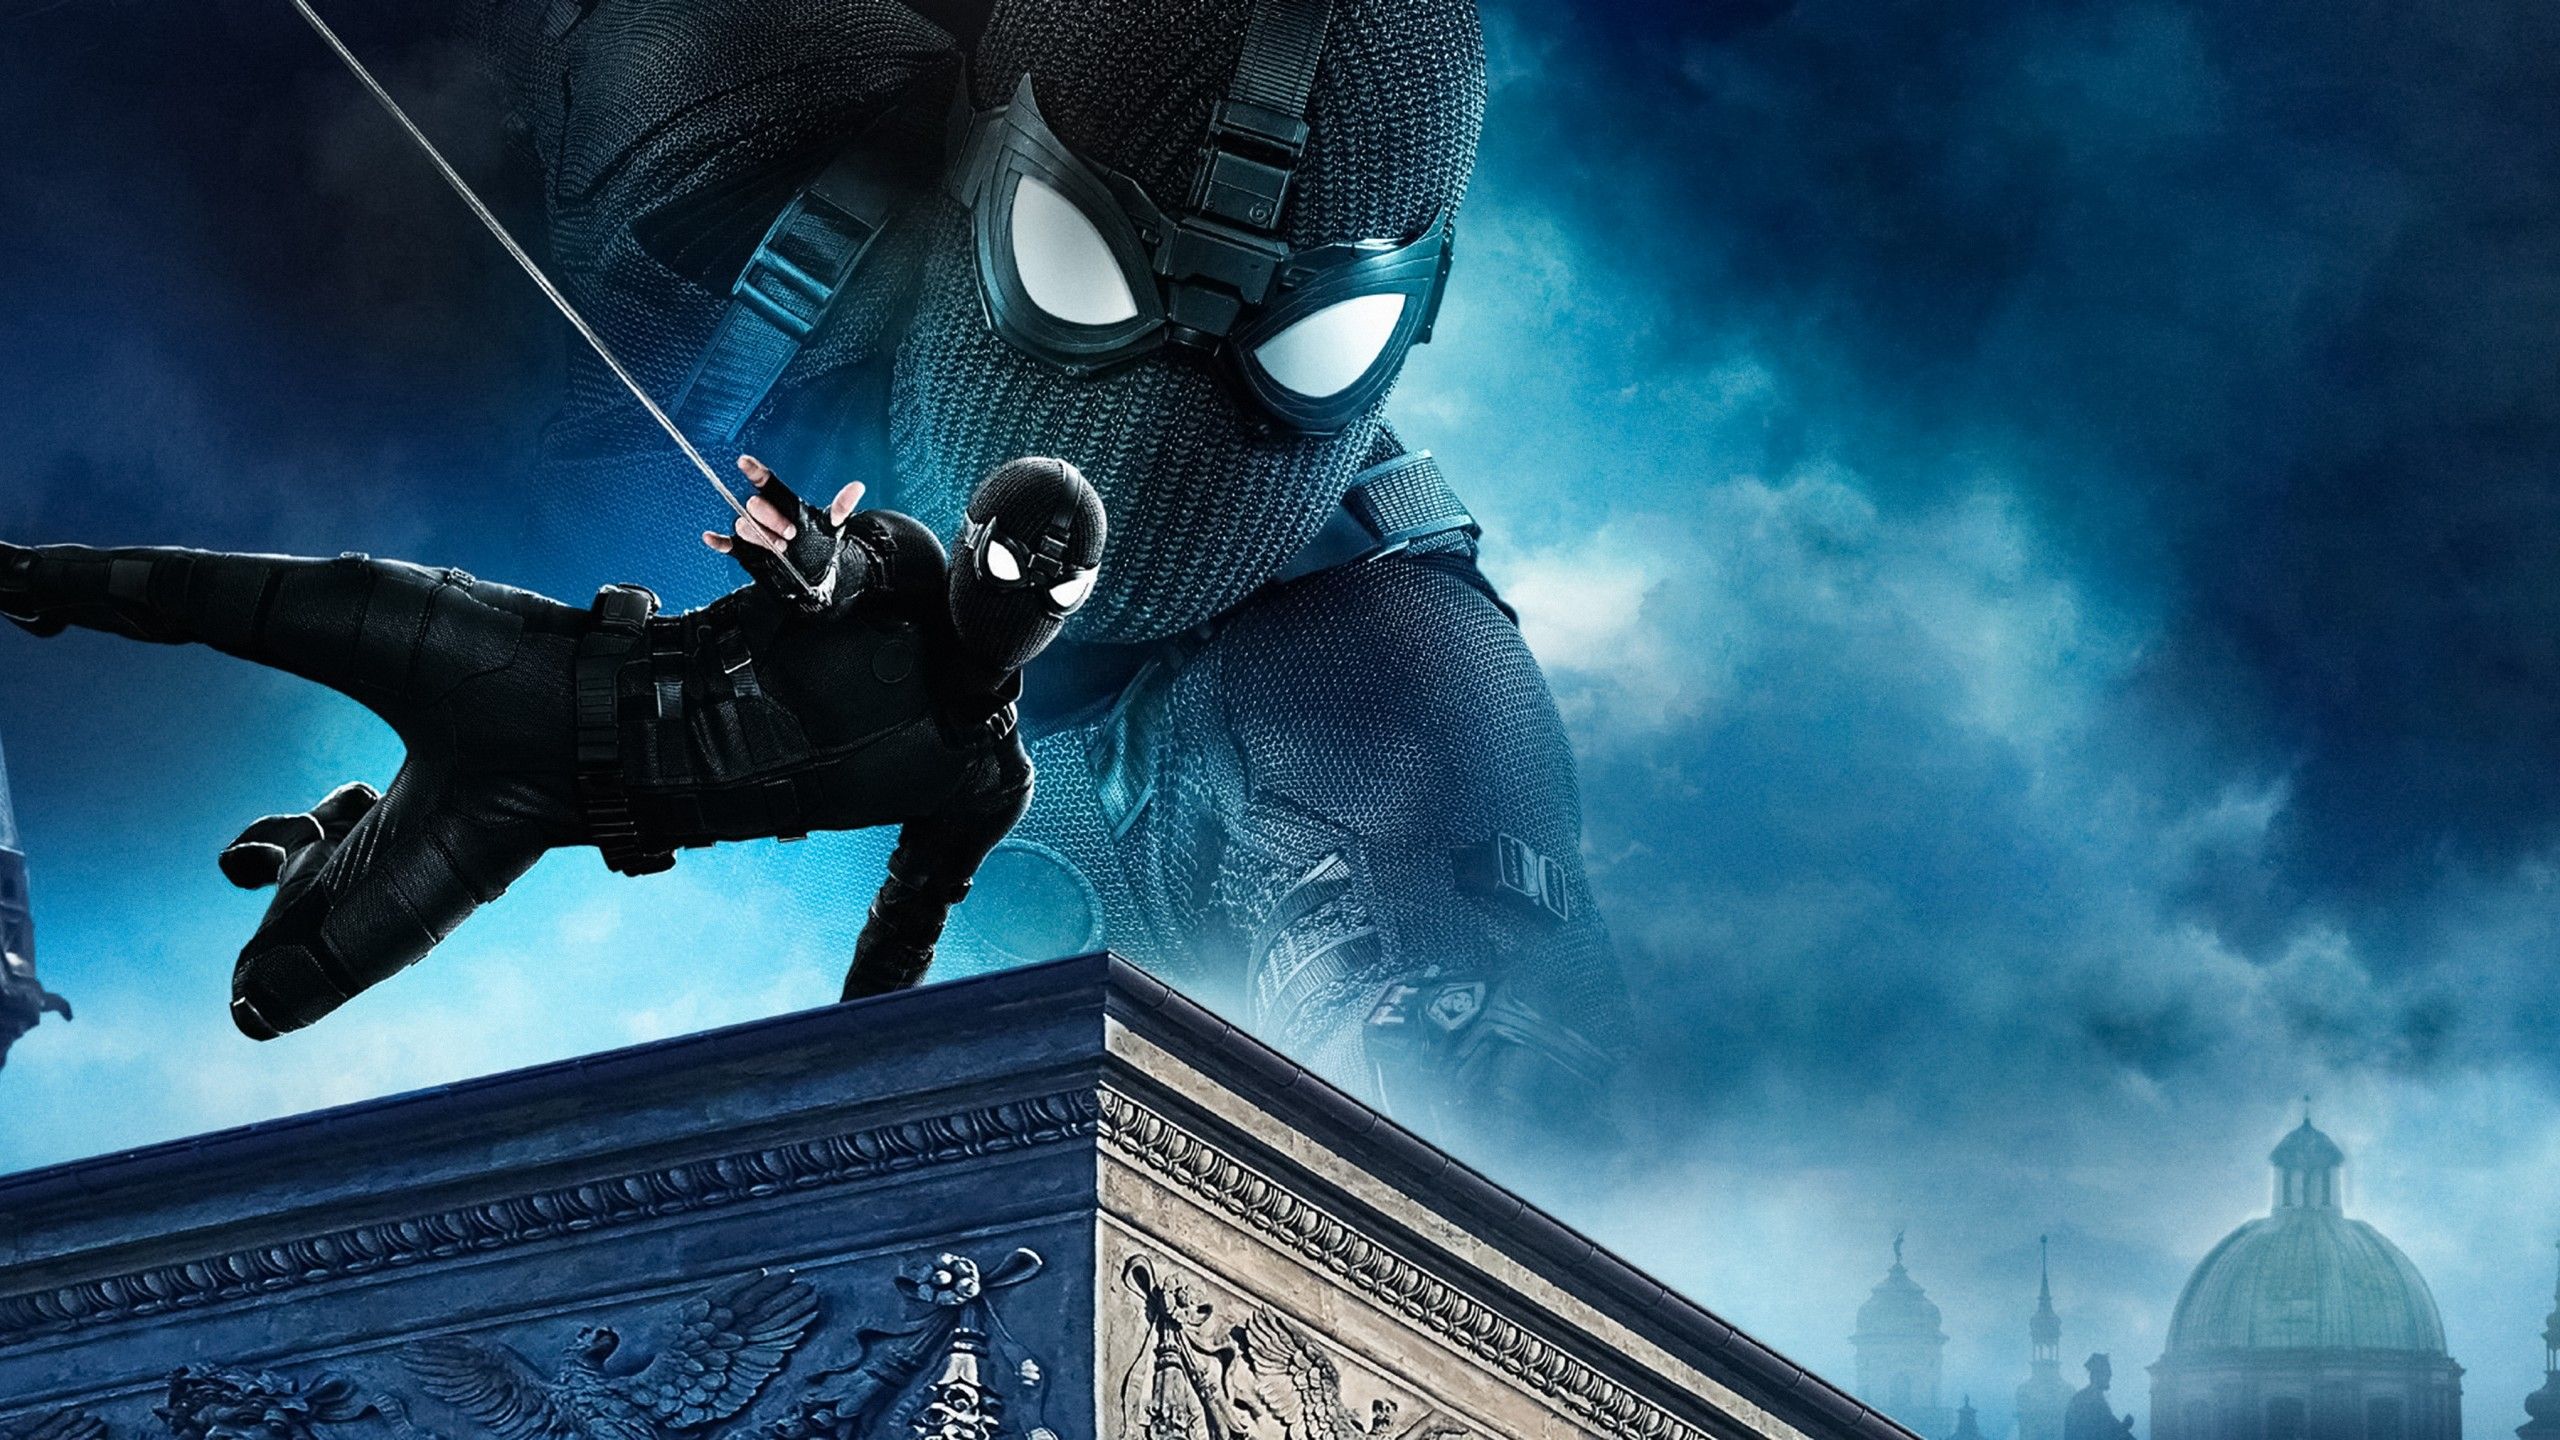 Spider Man: Far From Home 4K Wallpaper, Night Monkey, Black Suit, Movies